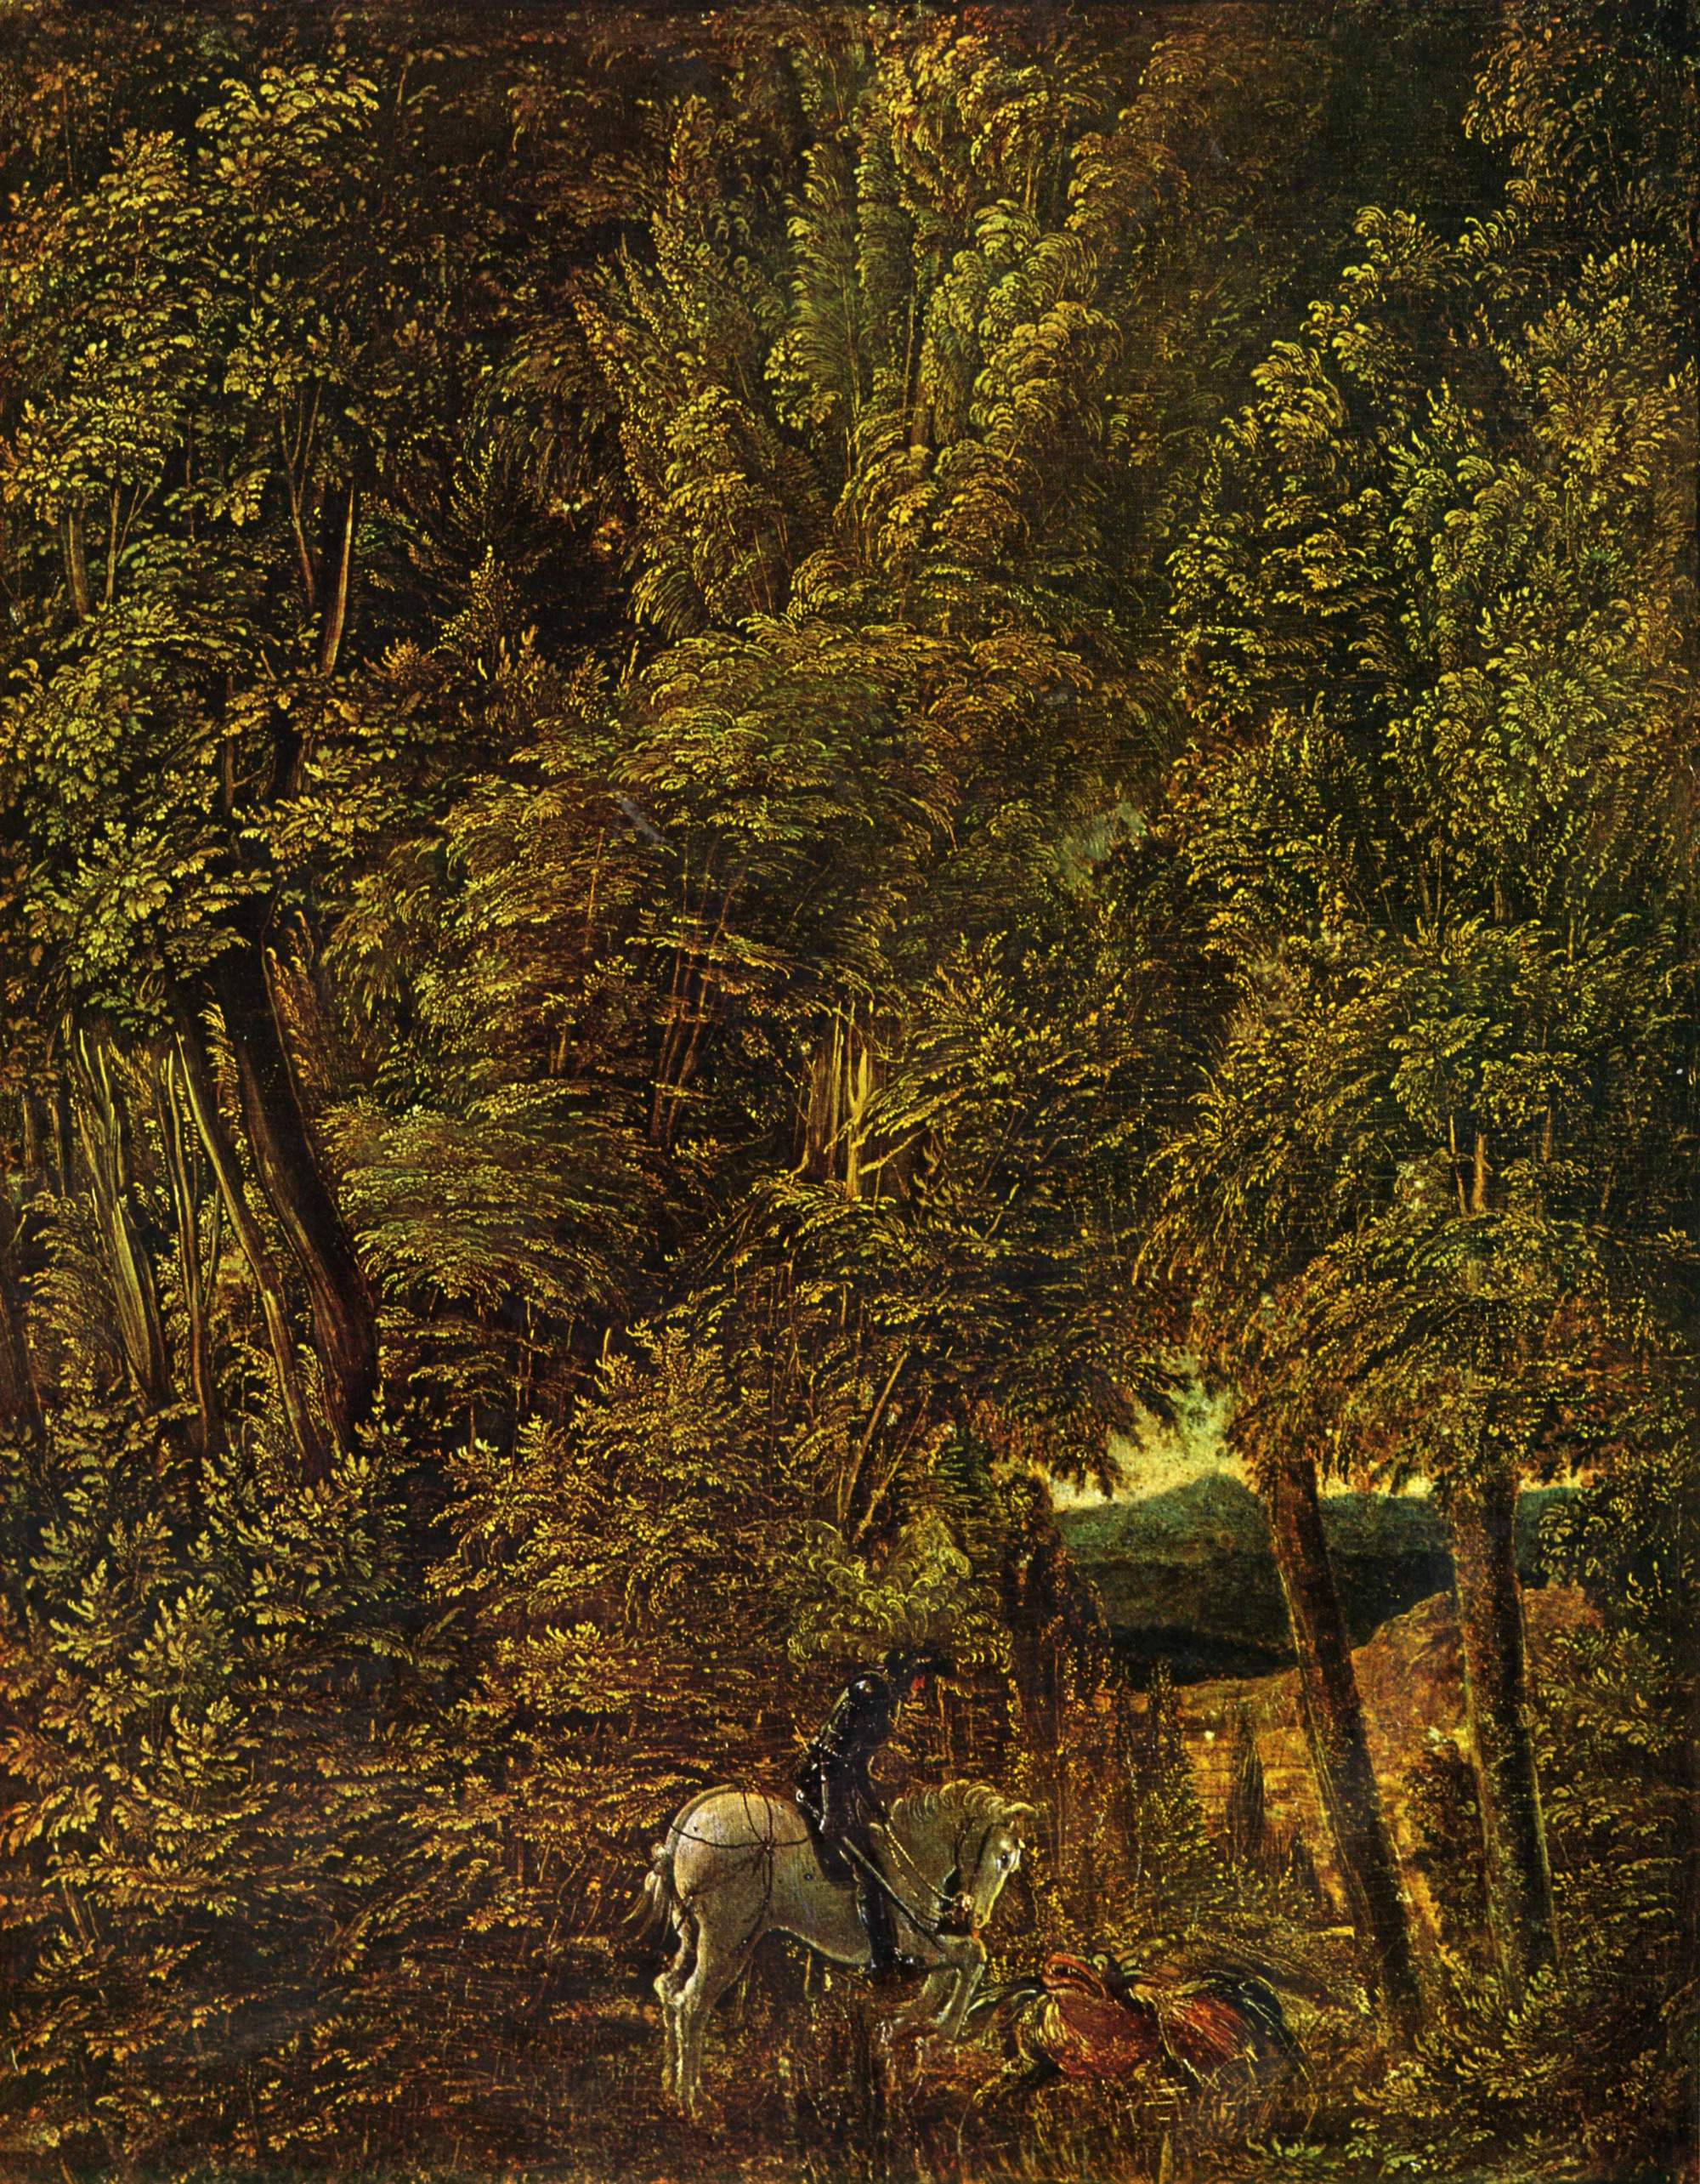 Countryside of Wood with Saint George Fighting the Dragon by Albrecht Altdorfer - 1510 - 22.5 × 28.2 cm Alte Pinakothek